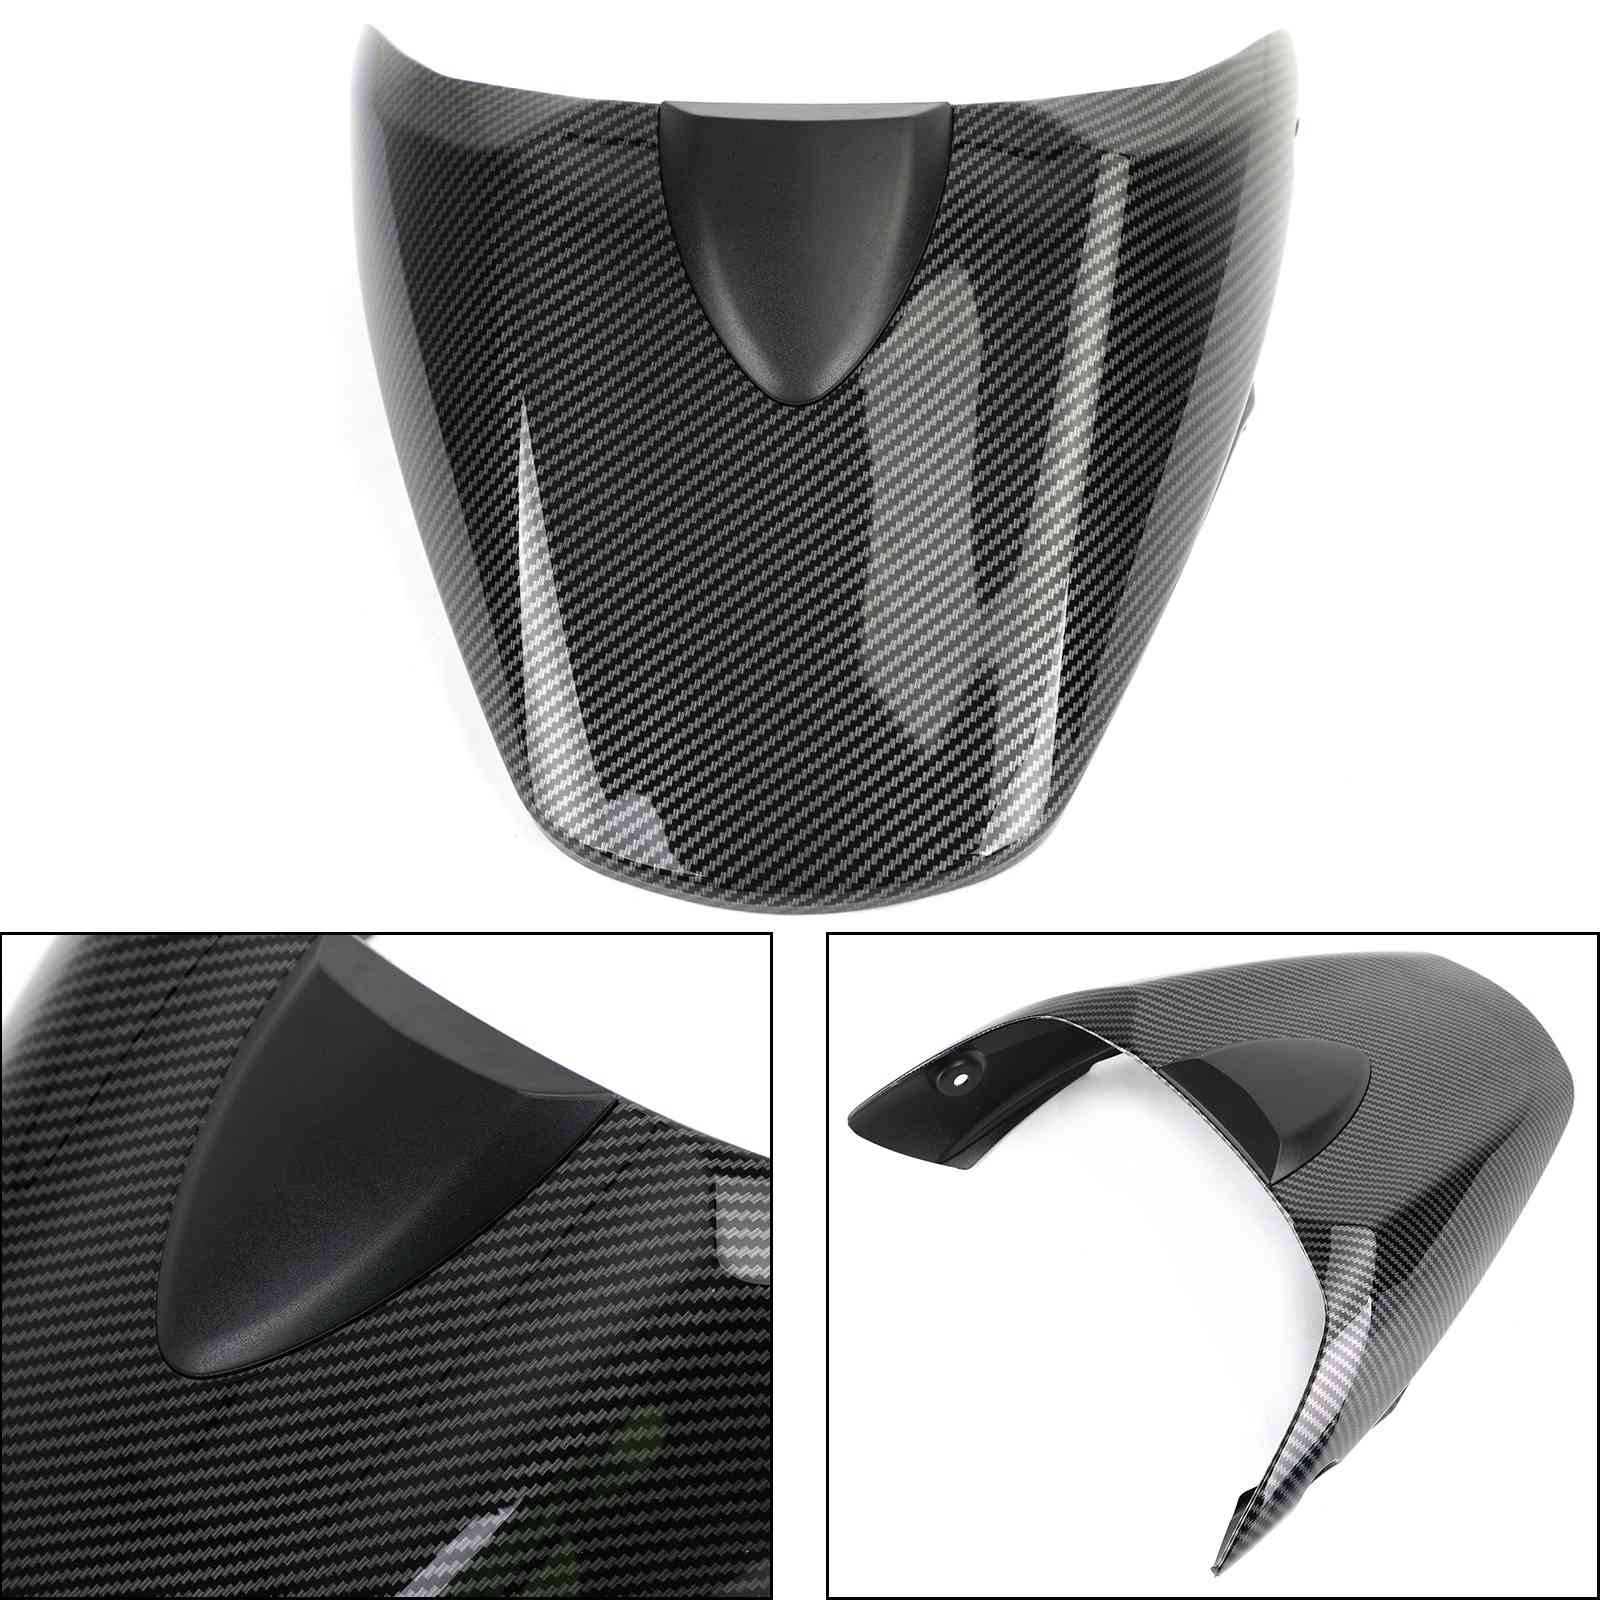 All Years Ducati 796 795 M1100 696 Motorcycle Rear Seat Fairing Cover Cowl  CBN